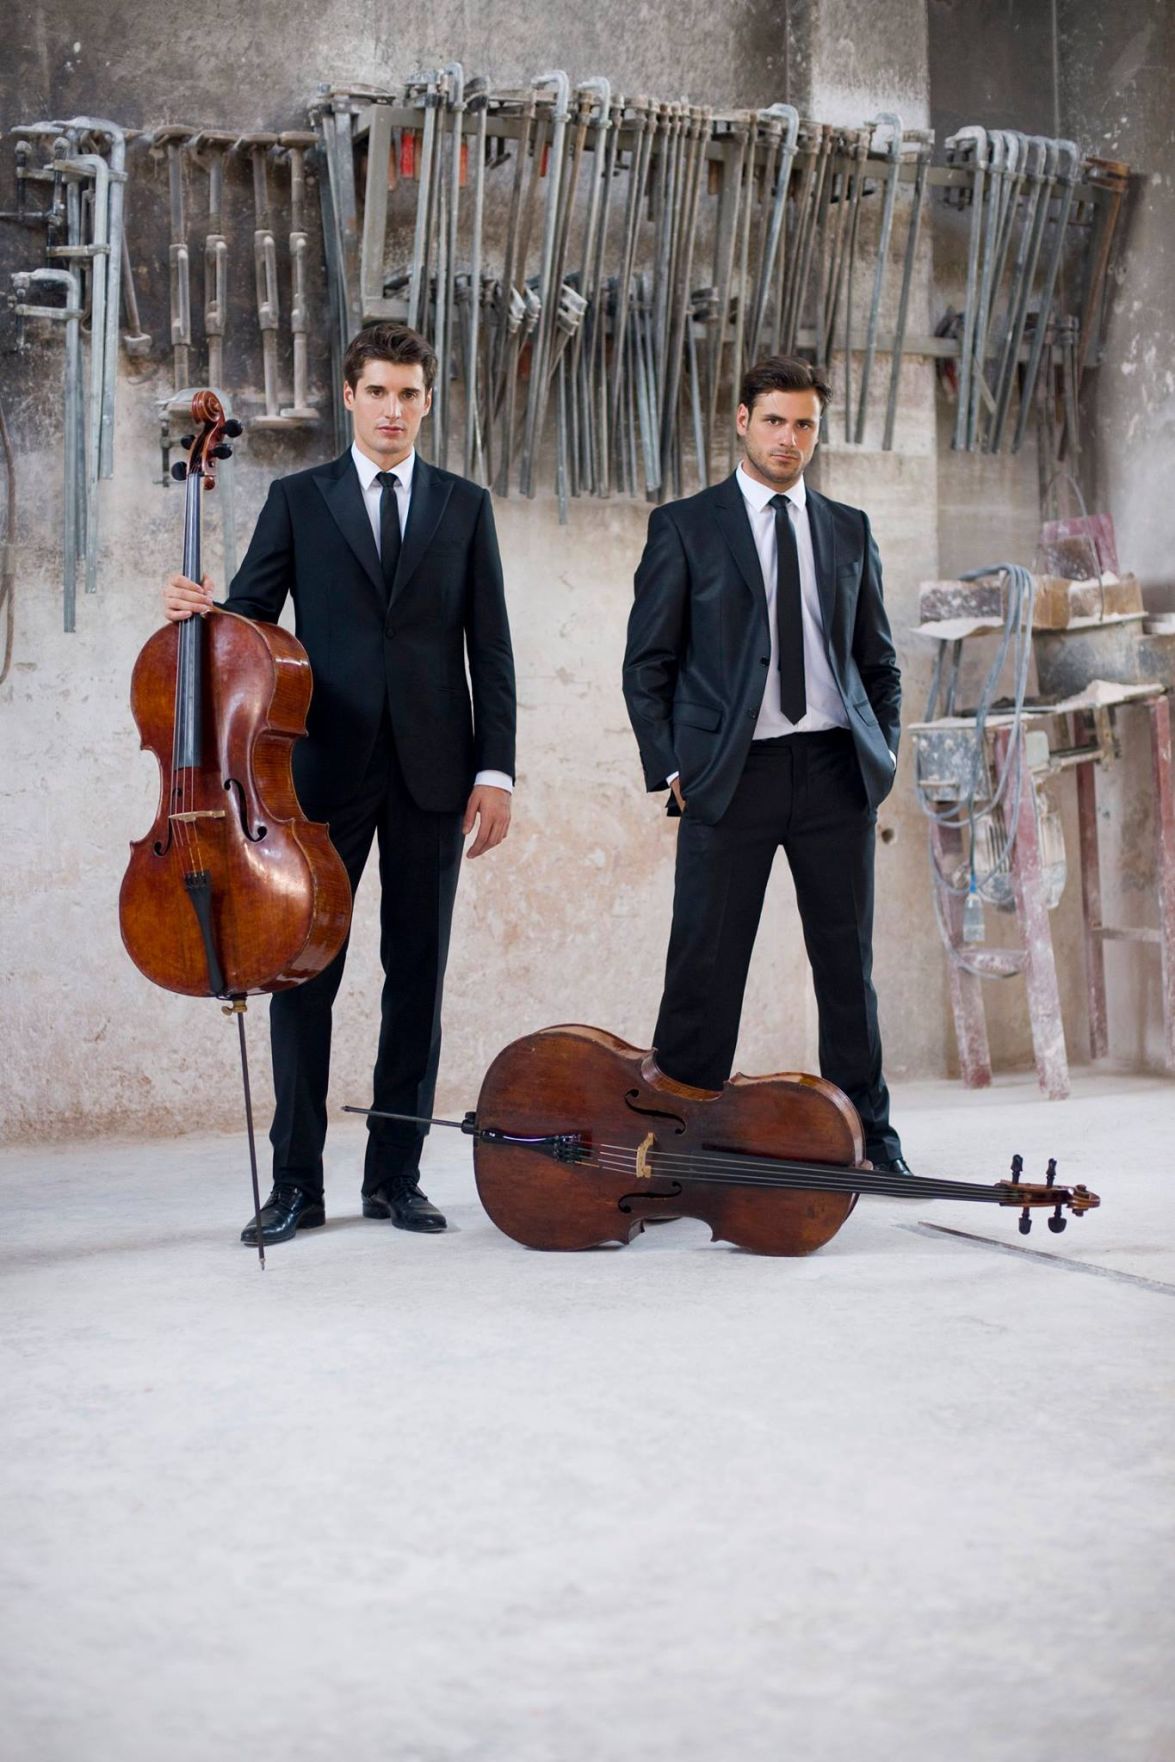 2Cellos to perform at Pinewood Bowl | Music | journalstar.com